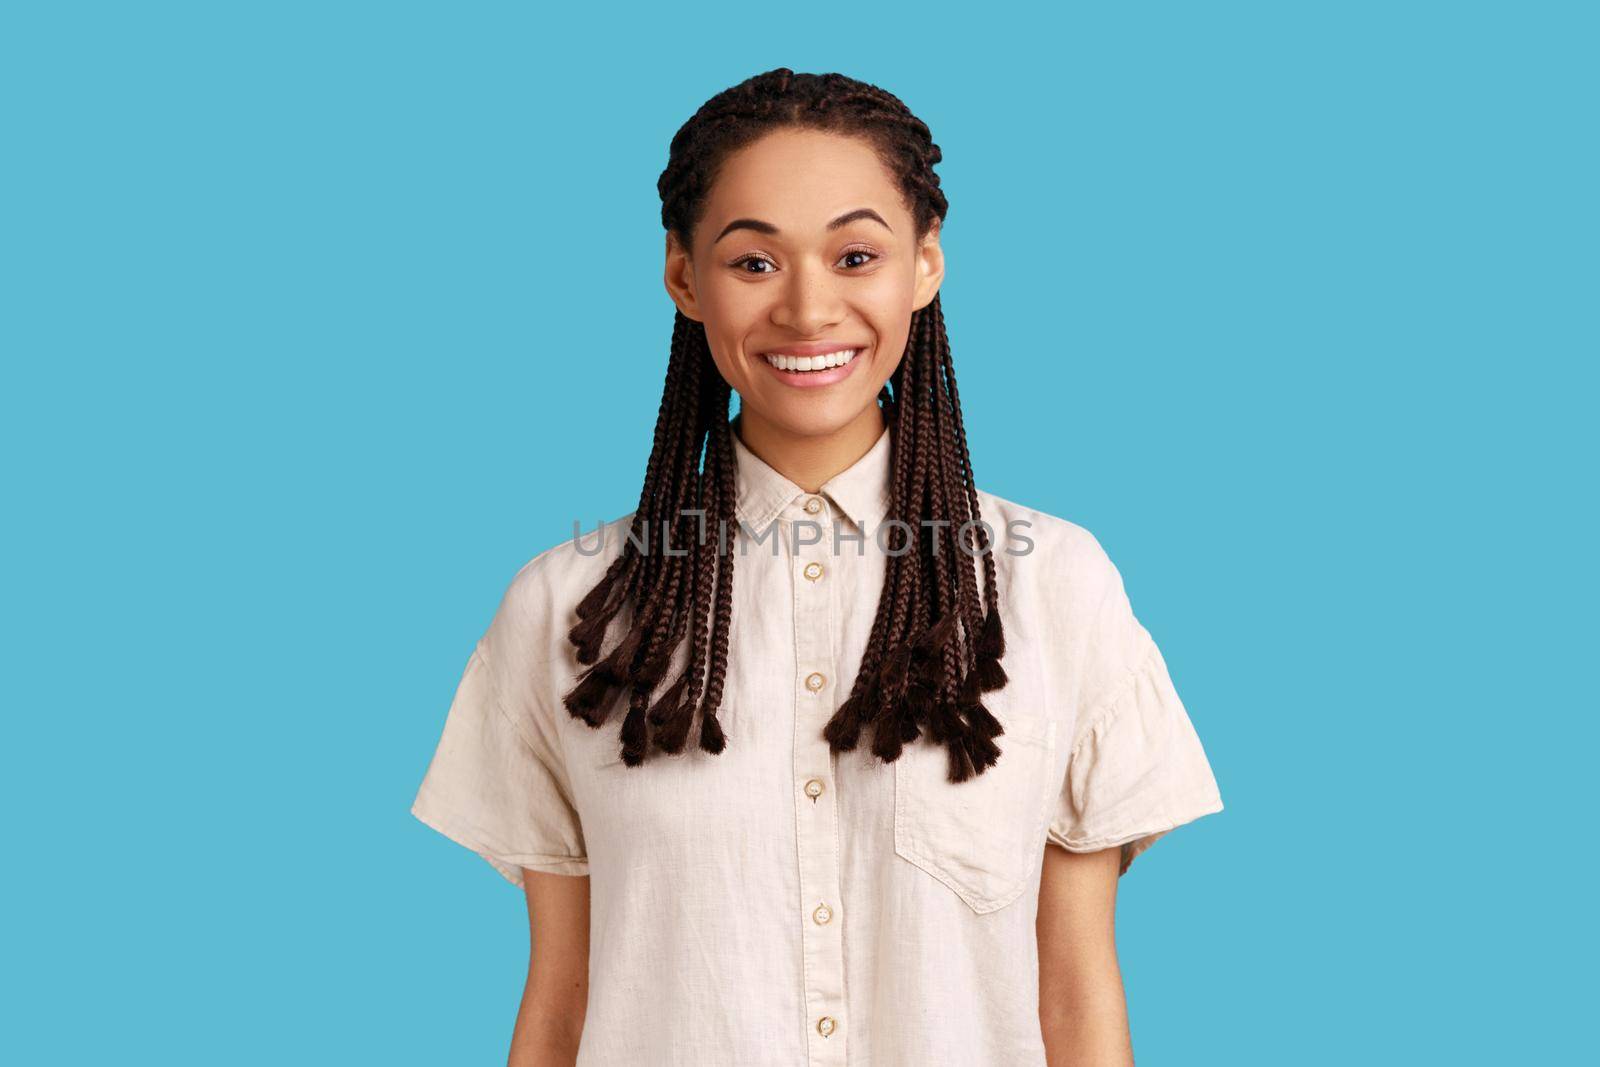 Portrait of cheerful beautiful woman with black dreadlocks, having charming engaging smile and positive emotions, wearing white shirt. Indoor studio shot isolated on blue background.